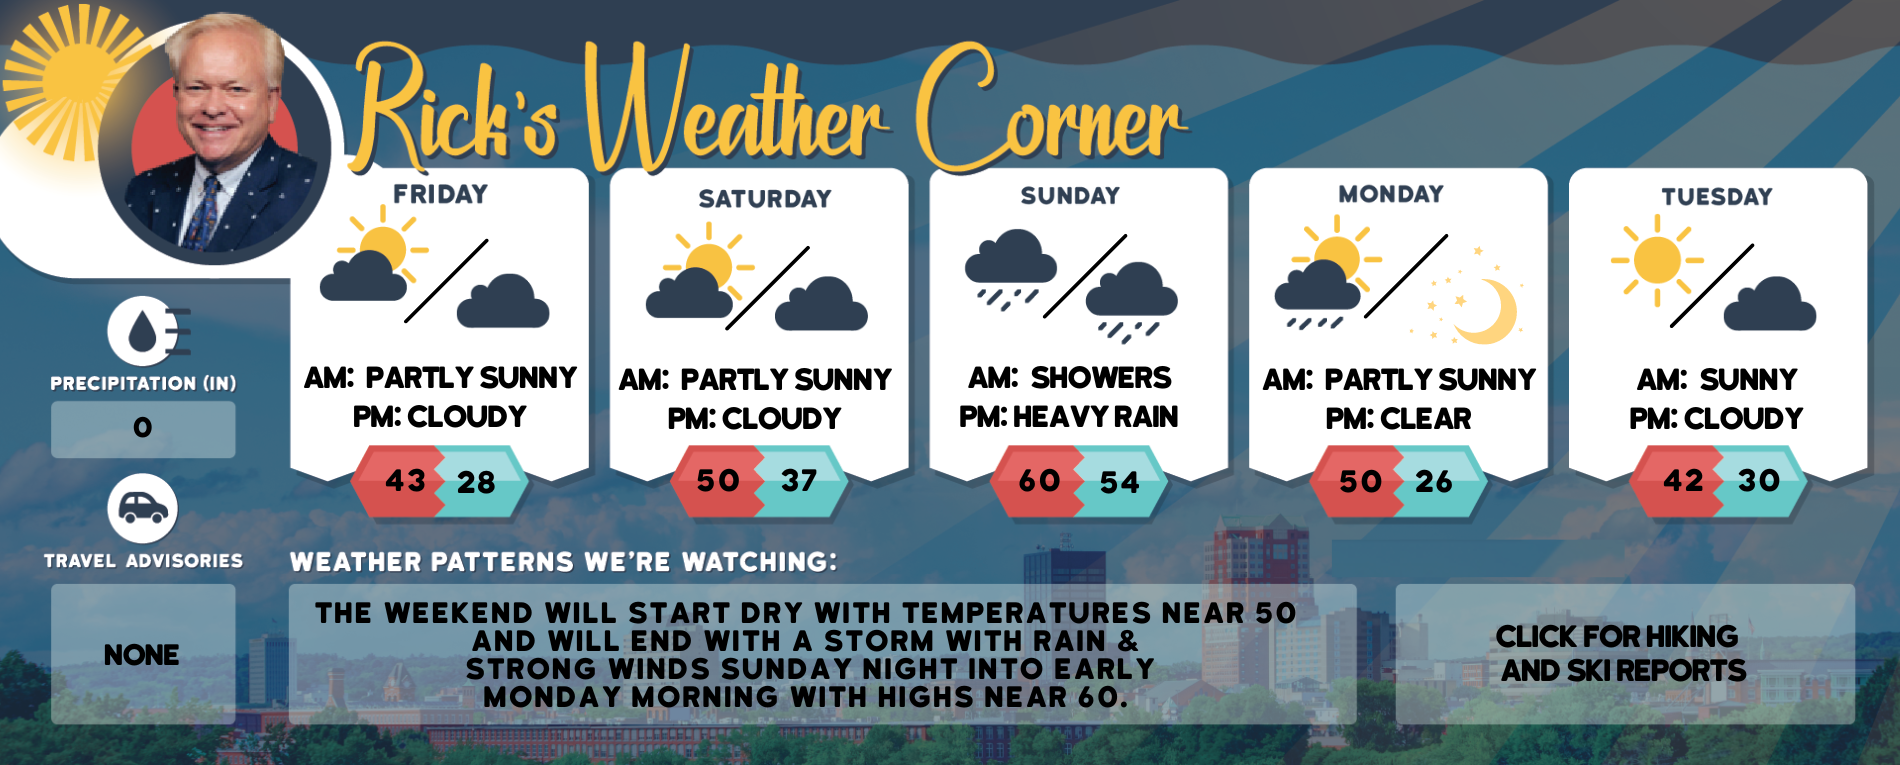 weather graphic 2 6